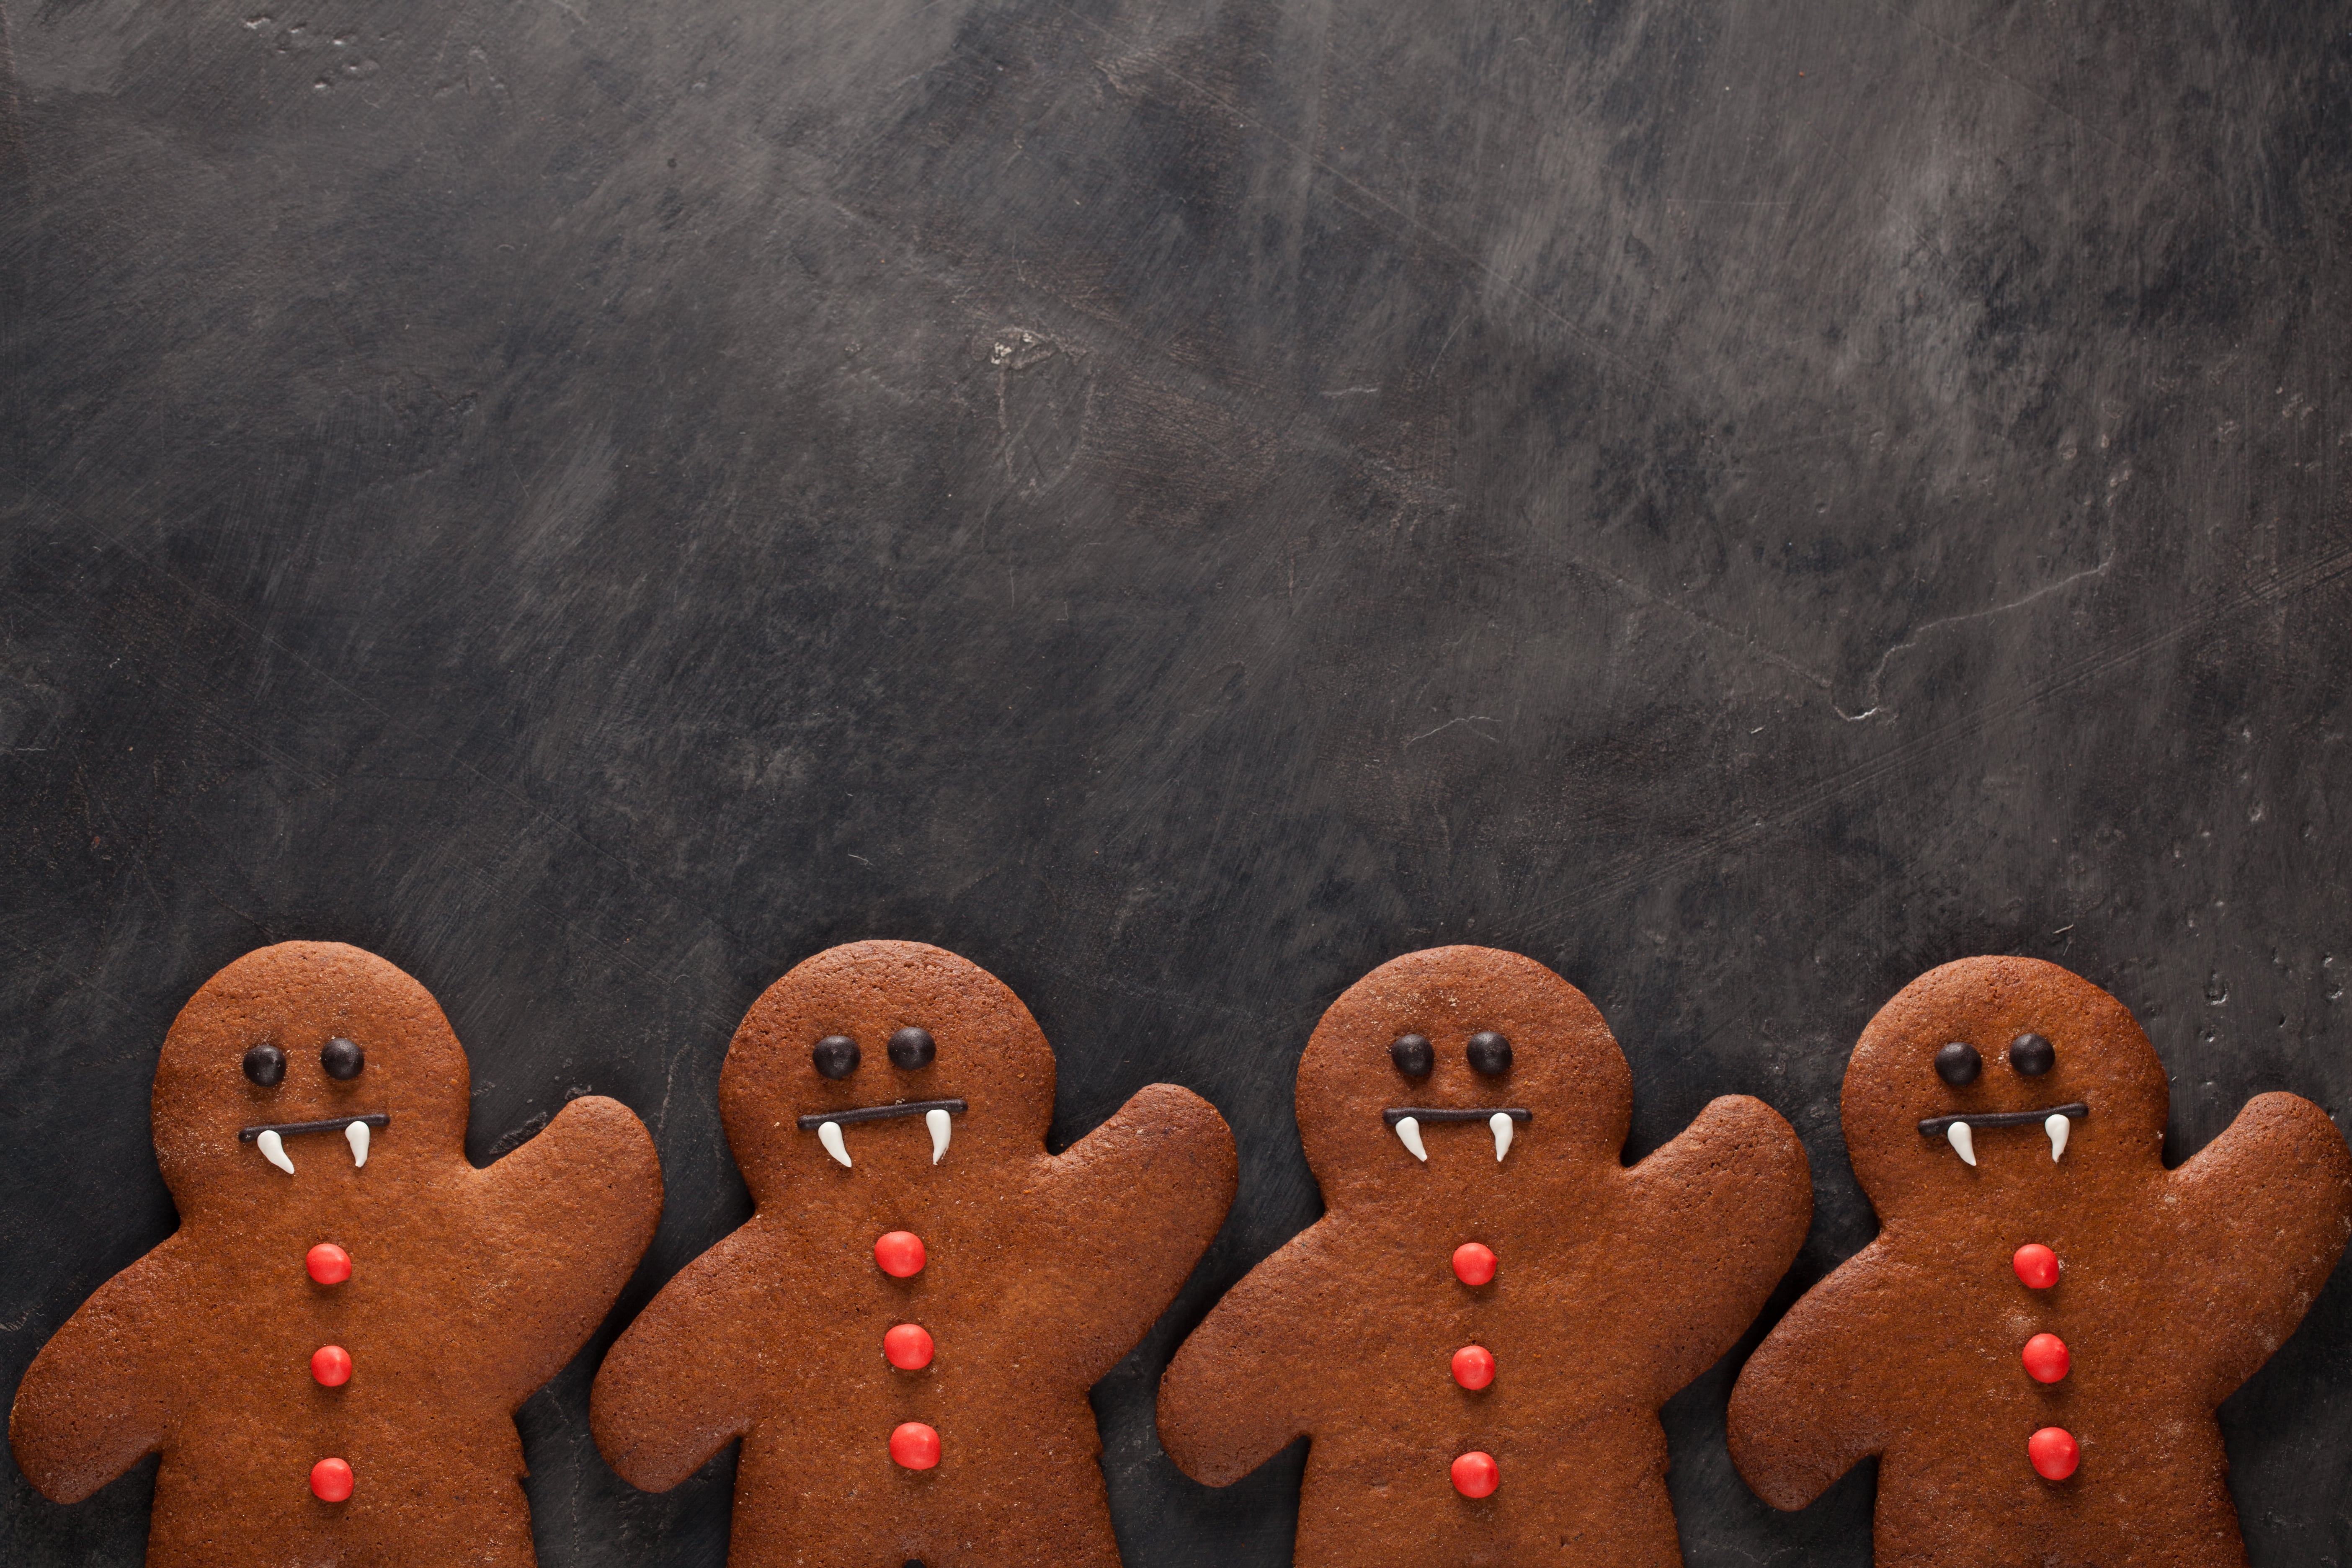 Homemade gingerbread cookies for Halloween in the form of vampires